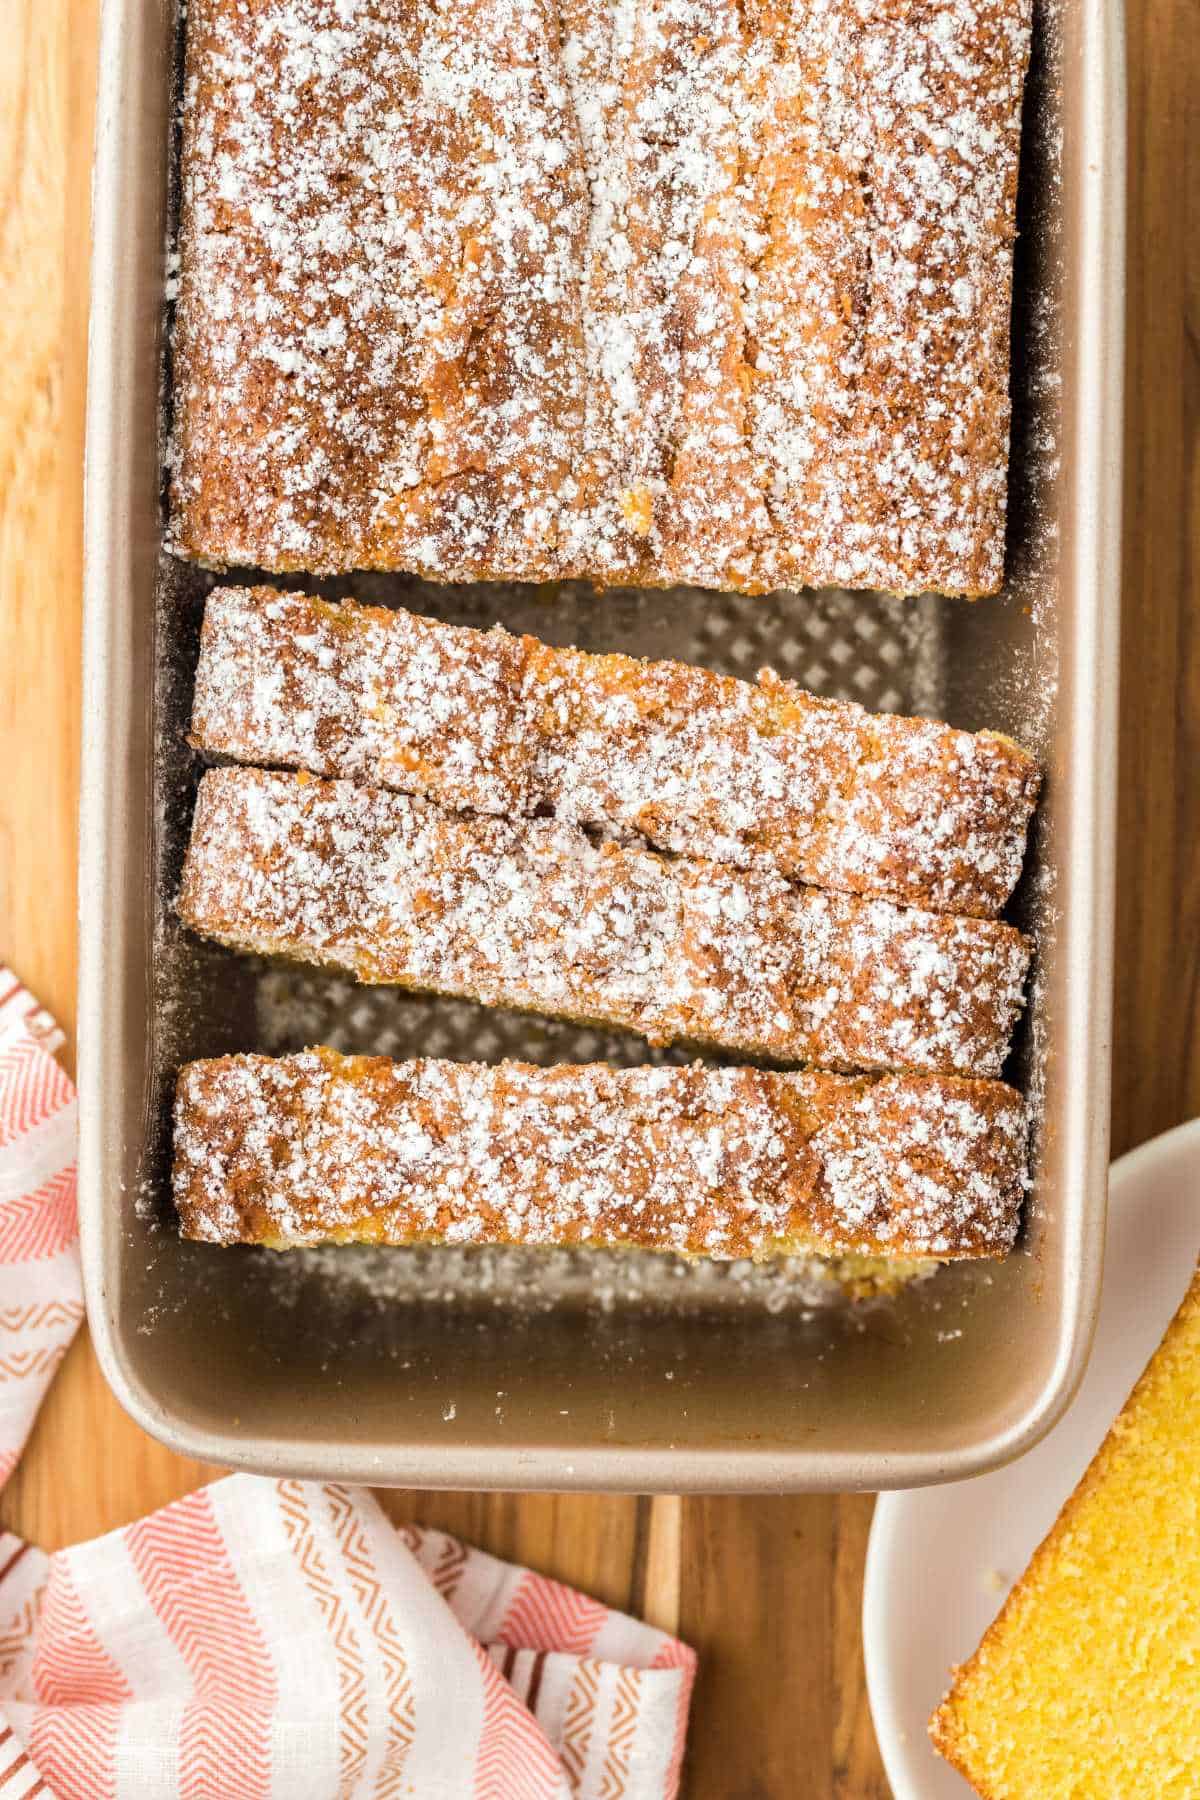 A loaf of cornmeal cake in a pan sprinkled with powdered sugar and a few slices cut and leaning forward in the pan.